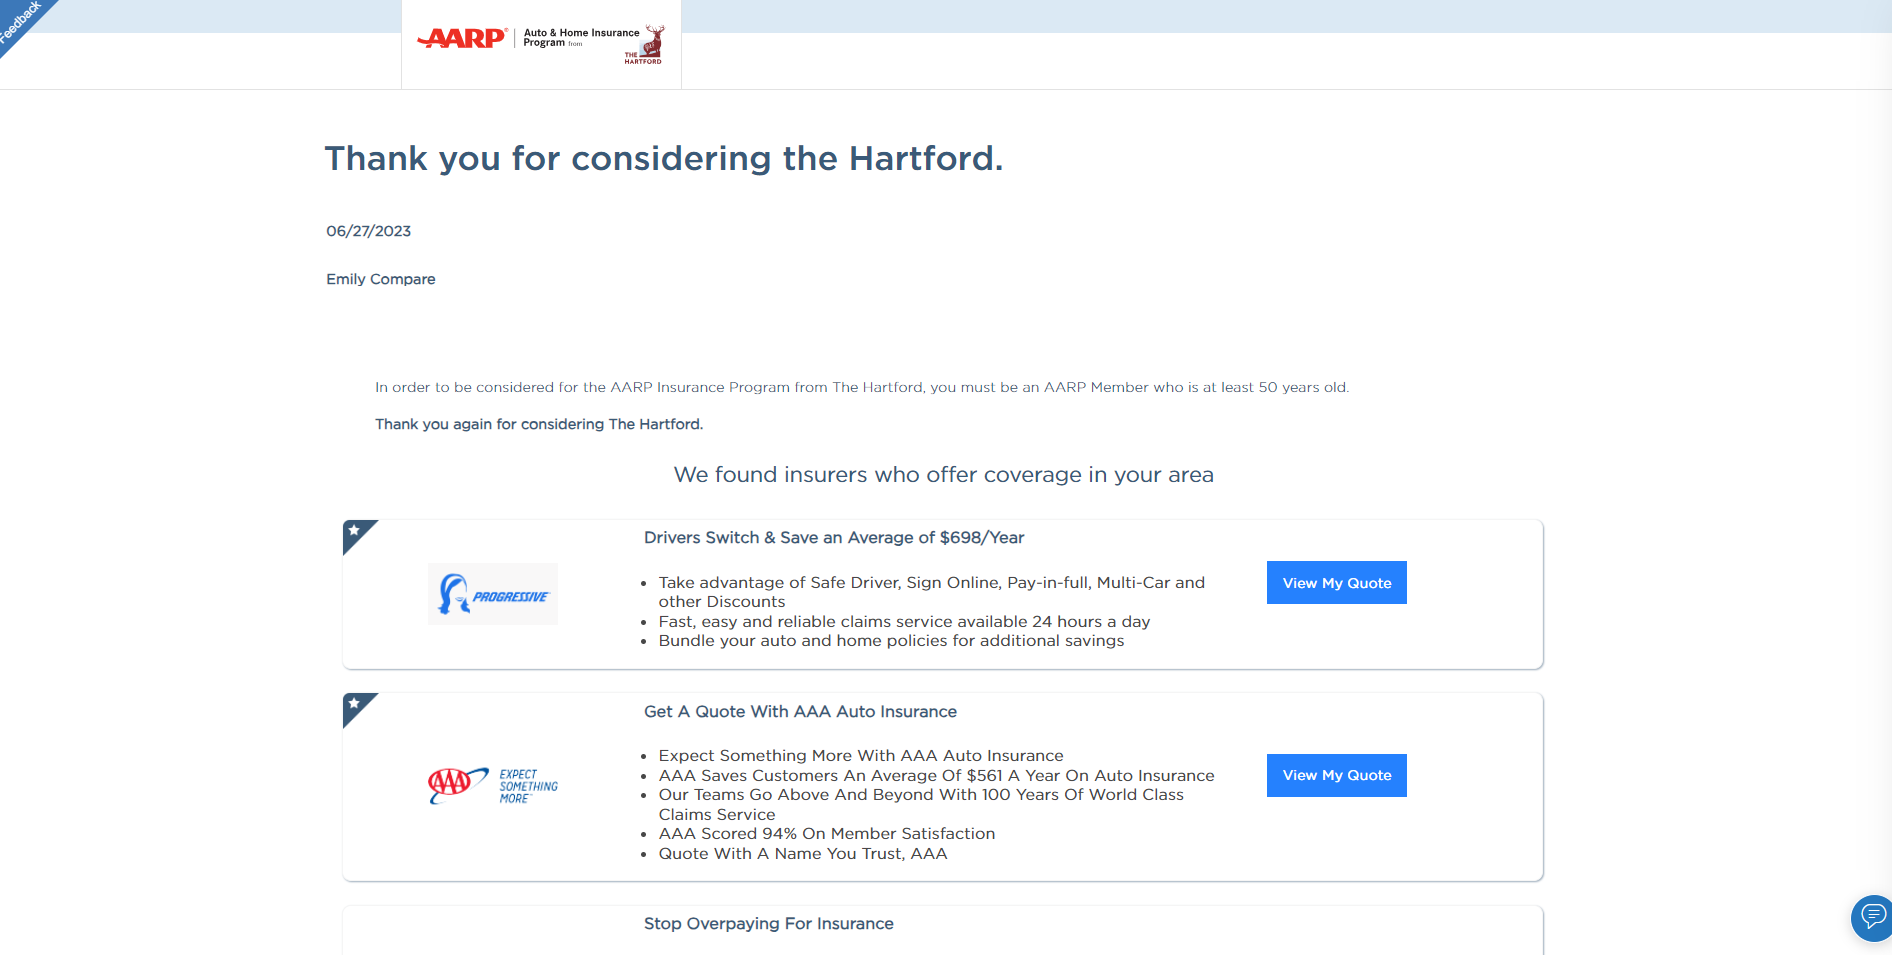 AARP Car Insurance From The Hartford